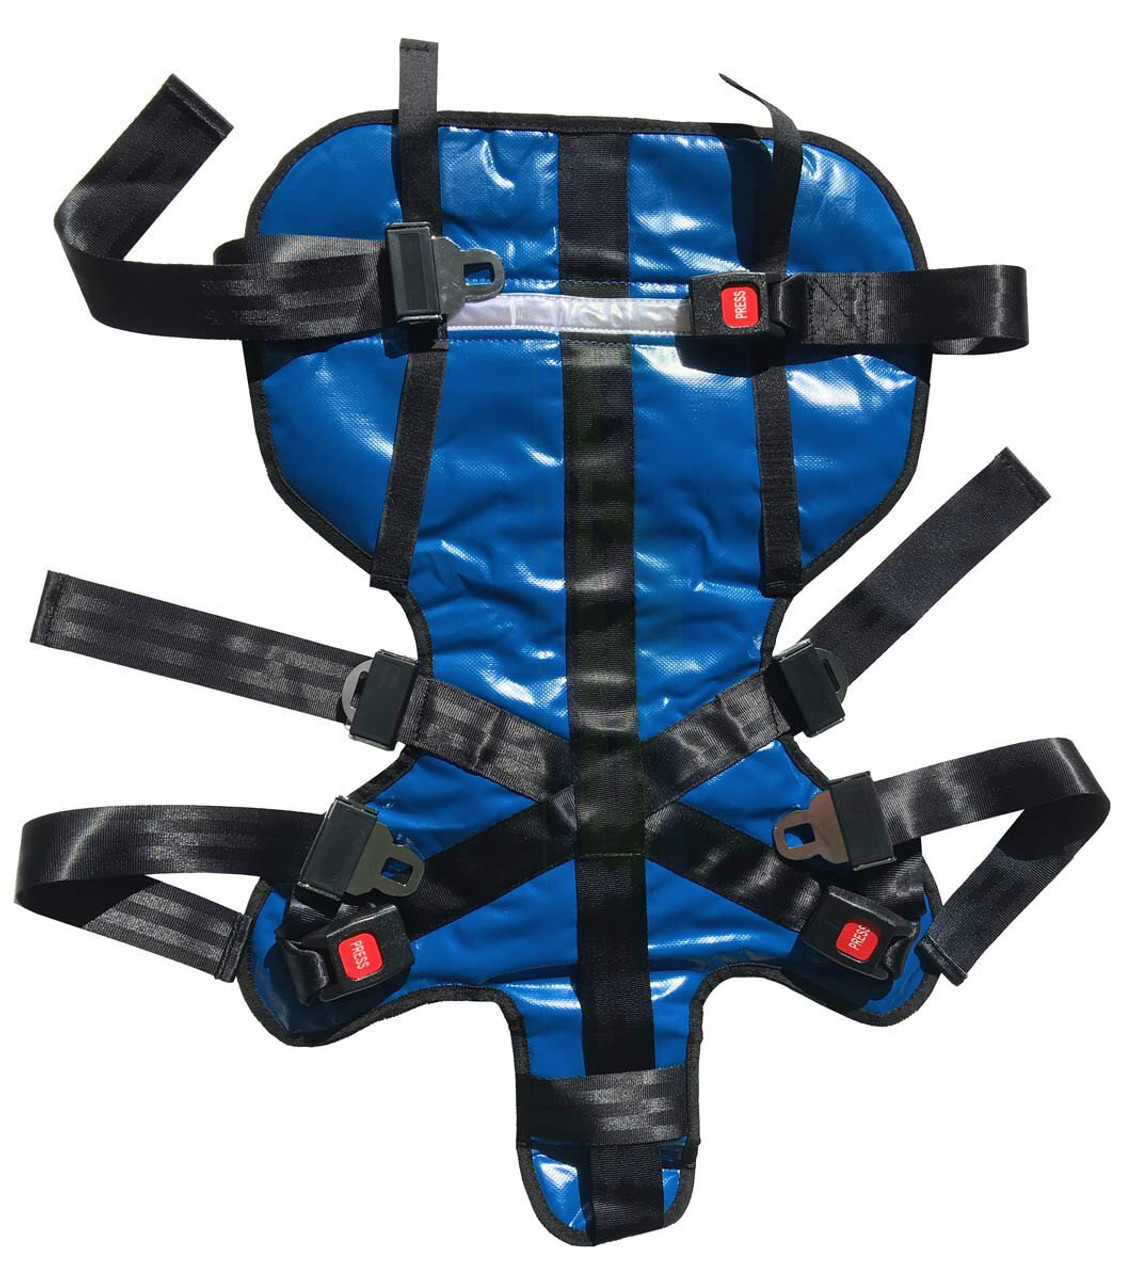 https://cdn11.bigcommerce.com/s-cjuawlv/images/stencil/1280x1280/products/3722/35300/Deluxe-Pediatric-Child-Restraint-Seat-System-Front2__50223.1604356824.jpg?c=2